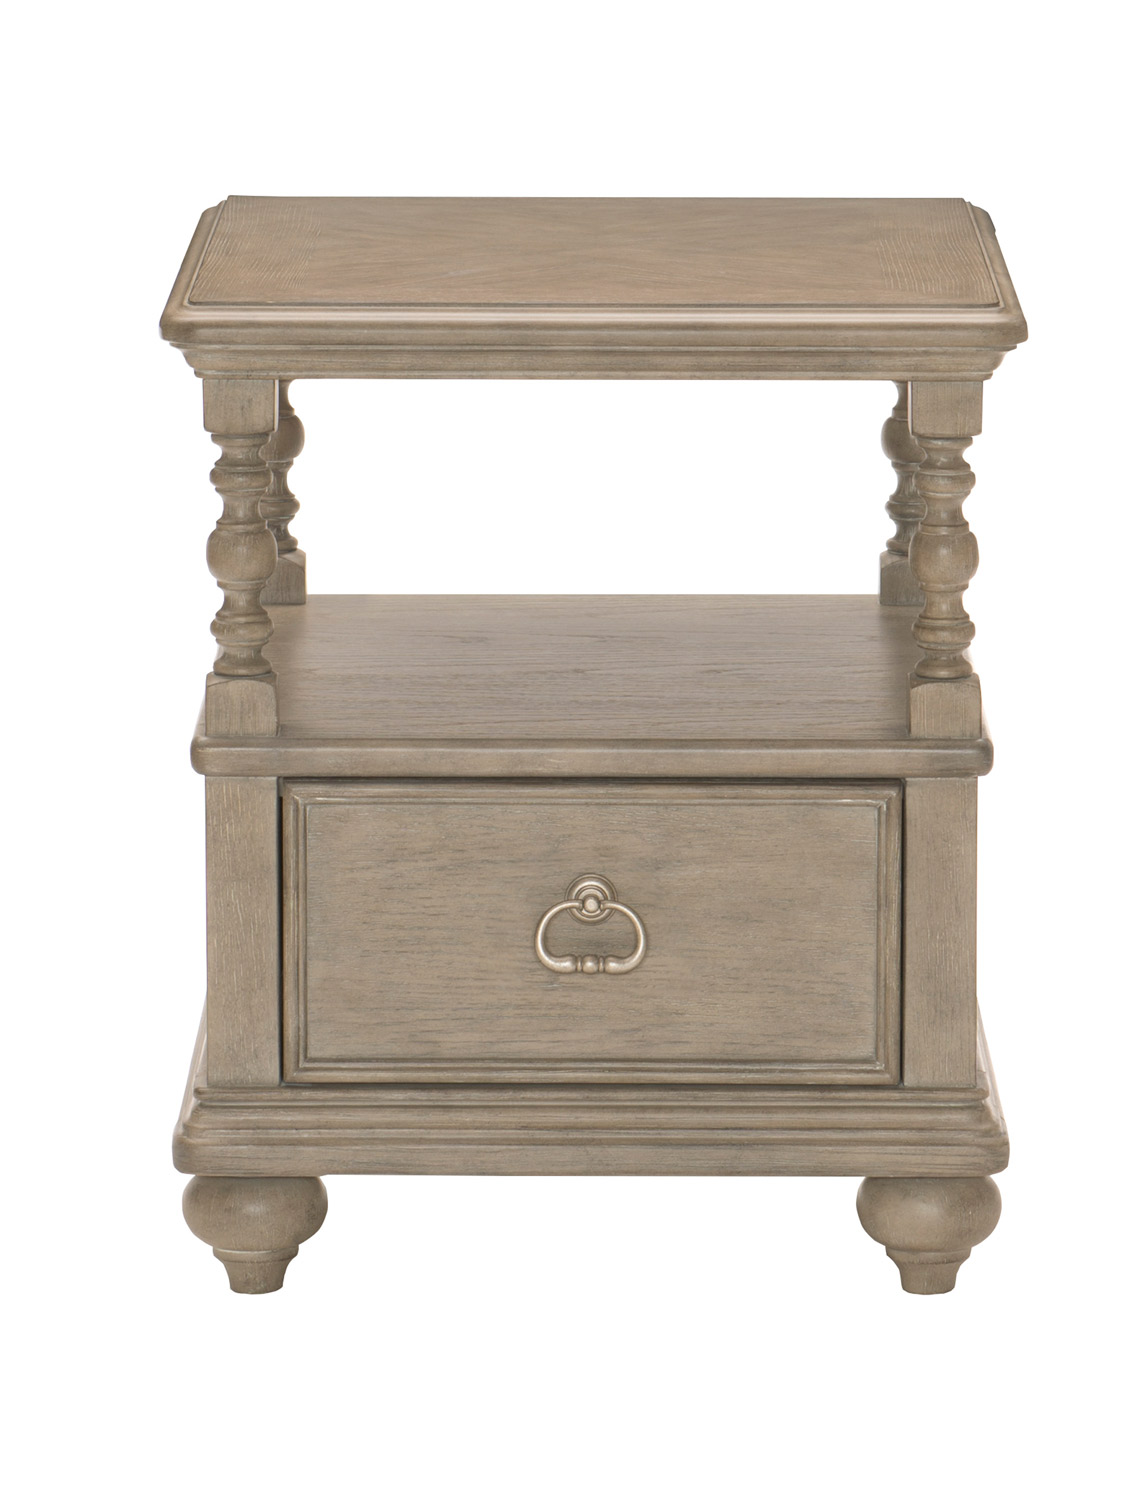 Homelegance Grayling Down End Table with Functional Drawer - Driftwood Gray